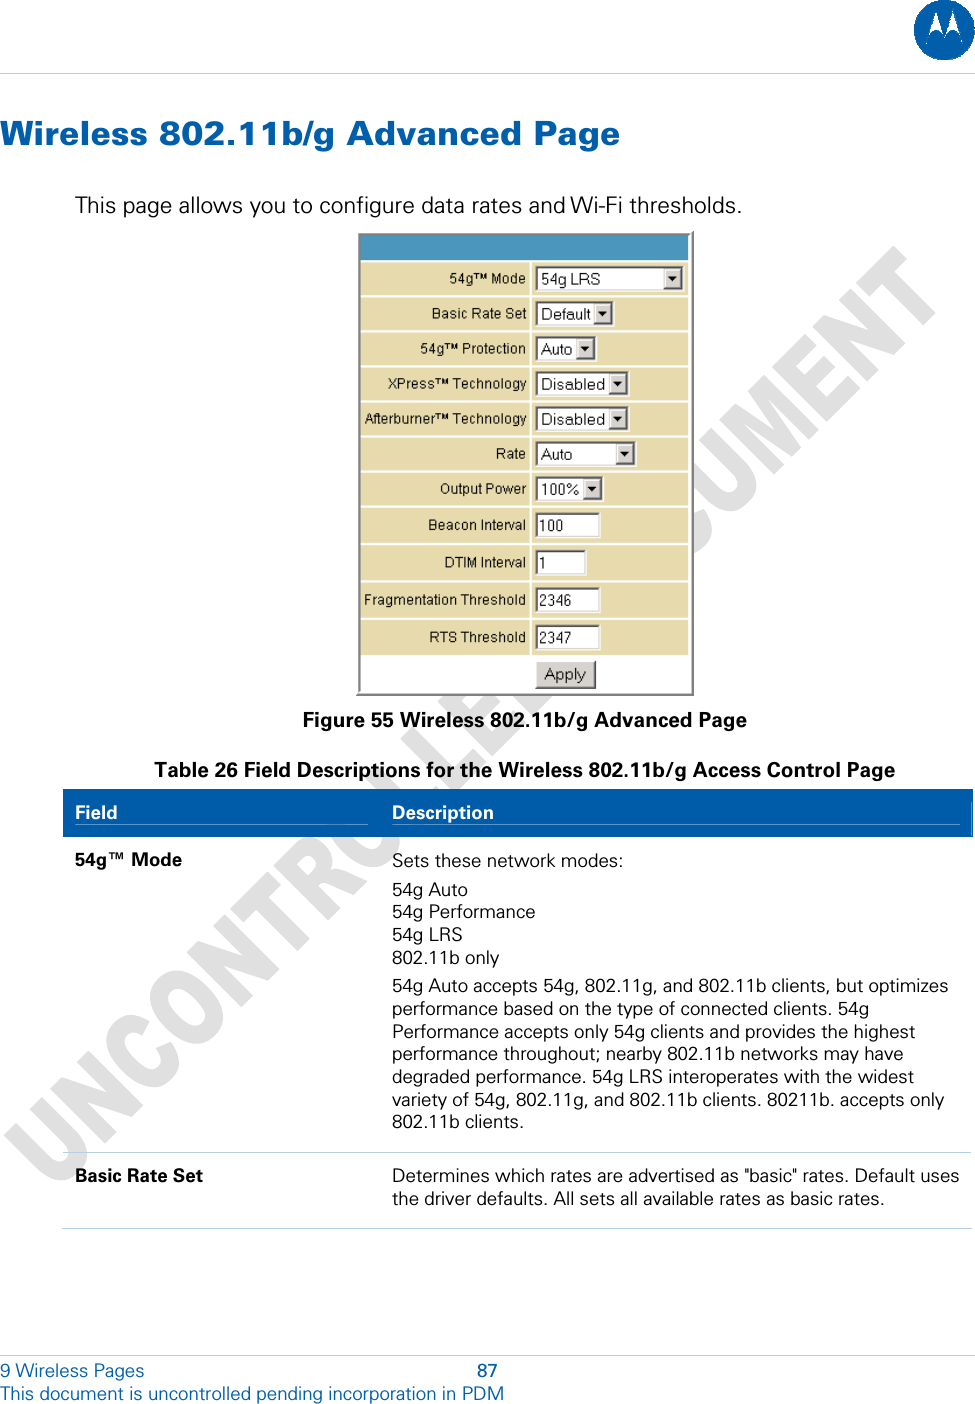  Wireless 802.11b/g Advanced Page This page allows you to configure data rates and Wi-Fi thresholds.  Figure 55 Wireless 802.11b/g Advanced Page Table 26 Field Descriptions for the Wireless 802.11b/g Access Control Page Field   Description 54g™ Mode  Sets these network modes:  54g Auto 54g Performance 54g LRS 802.11b only 54g Auto accepts 54g, 802.11g, and 802.11b clients, but optimizes performance based on the type of connected clients. 54g Performance accepts only 54g clients and provides the highest performance throughout; nearby 802.11b networks may have degraded performance. 54g LRS interoperates with the widest variety of 54g, 802.11g, and 802.11b clients. 80211b. accepts only 802.11b clients. Basic Rate Set  Determines which rates are advertised as &quot;basic&quot; rates. Default uses the driver defaults. All sets all available rates as basic rates. 9 Wireless Pages  87 This document is uncontrolled pending incorporation in PDM  